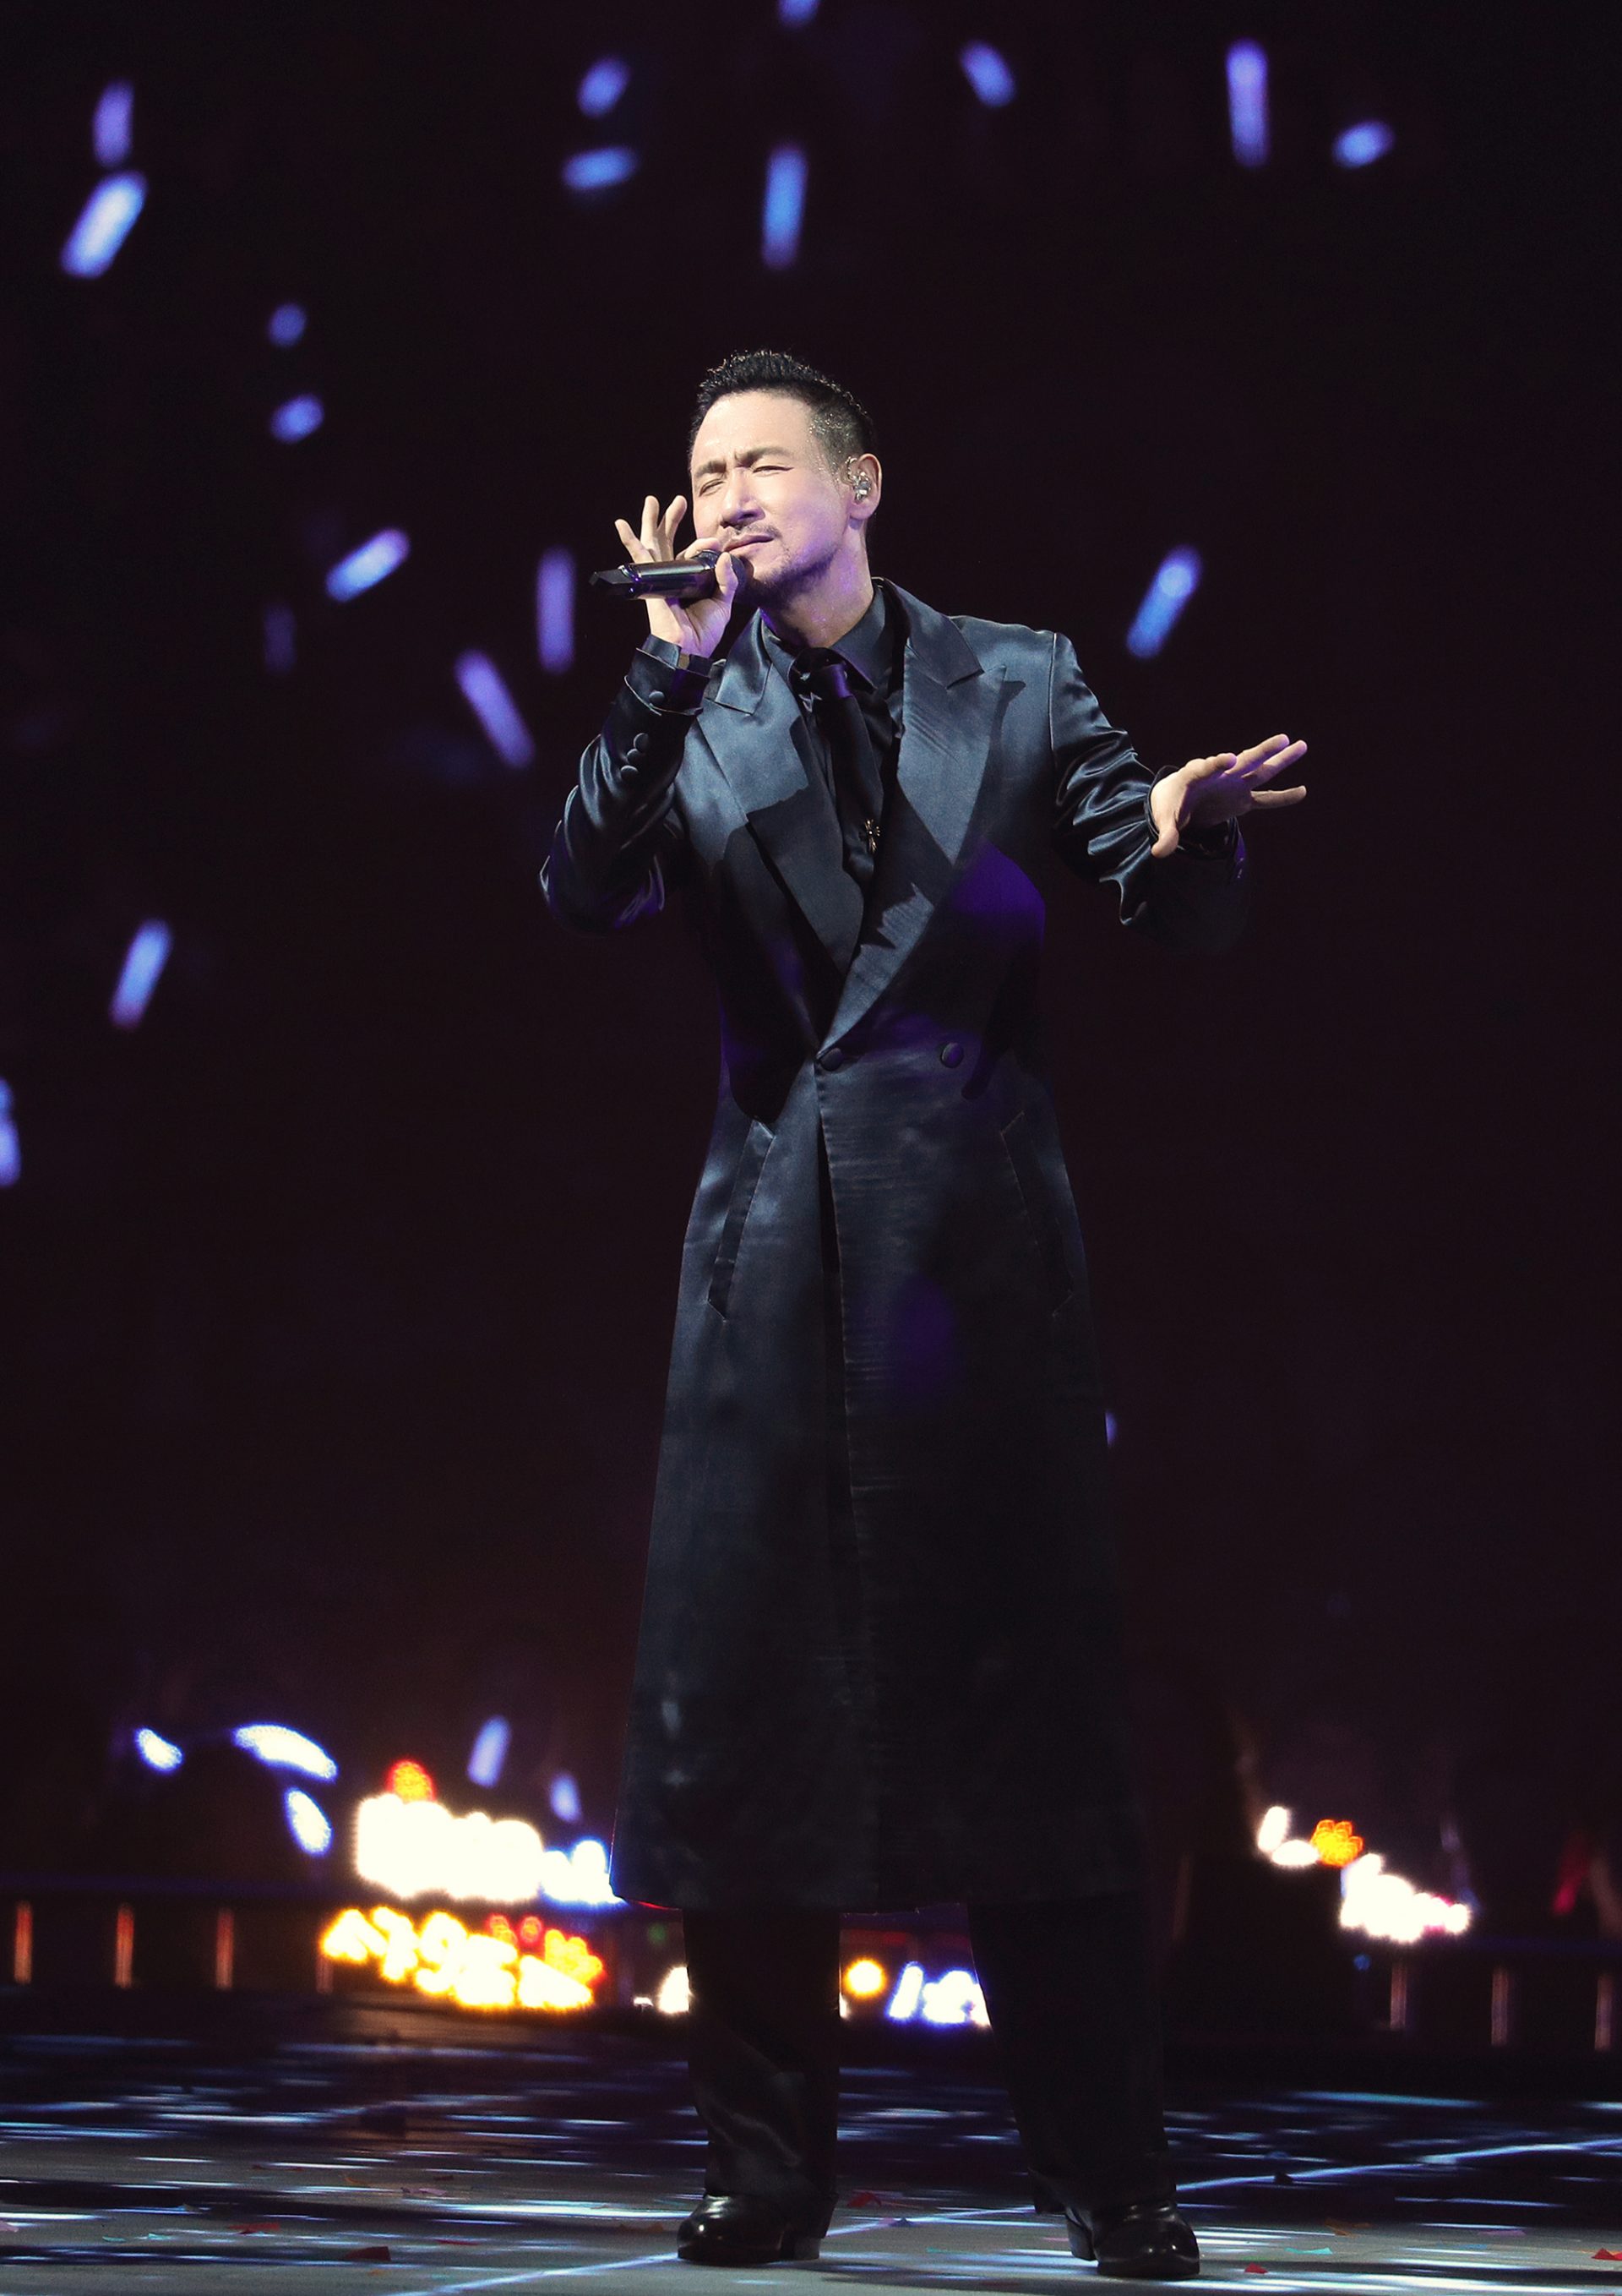 Concert Review Jacky Cheung Awards M'sian Audiences With 100 Points